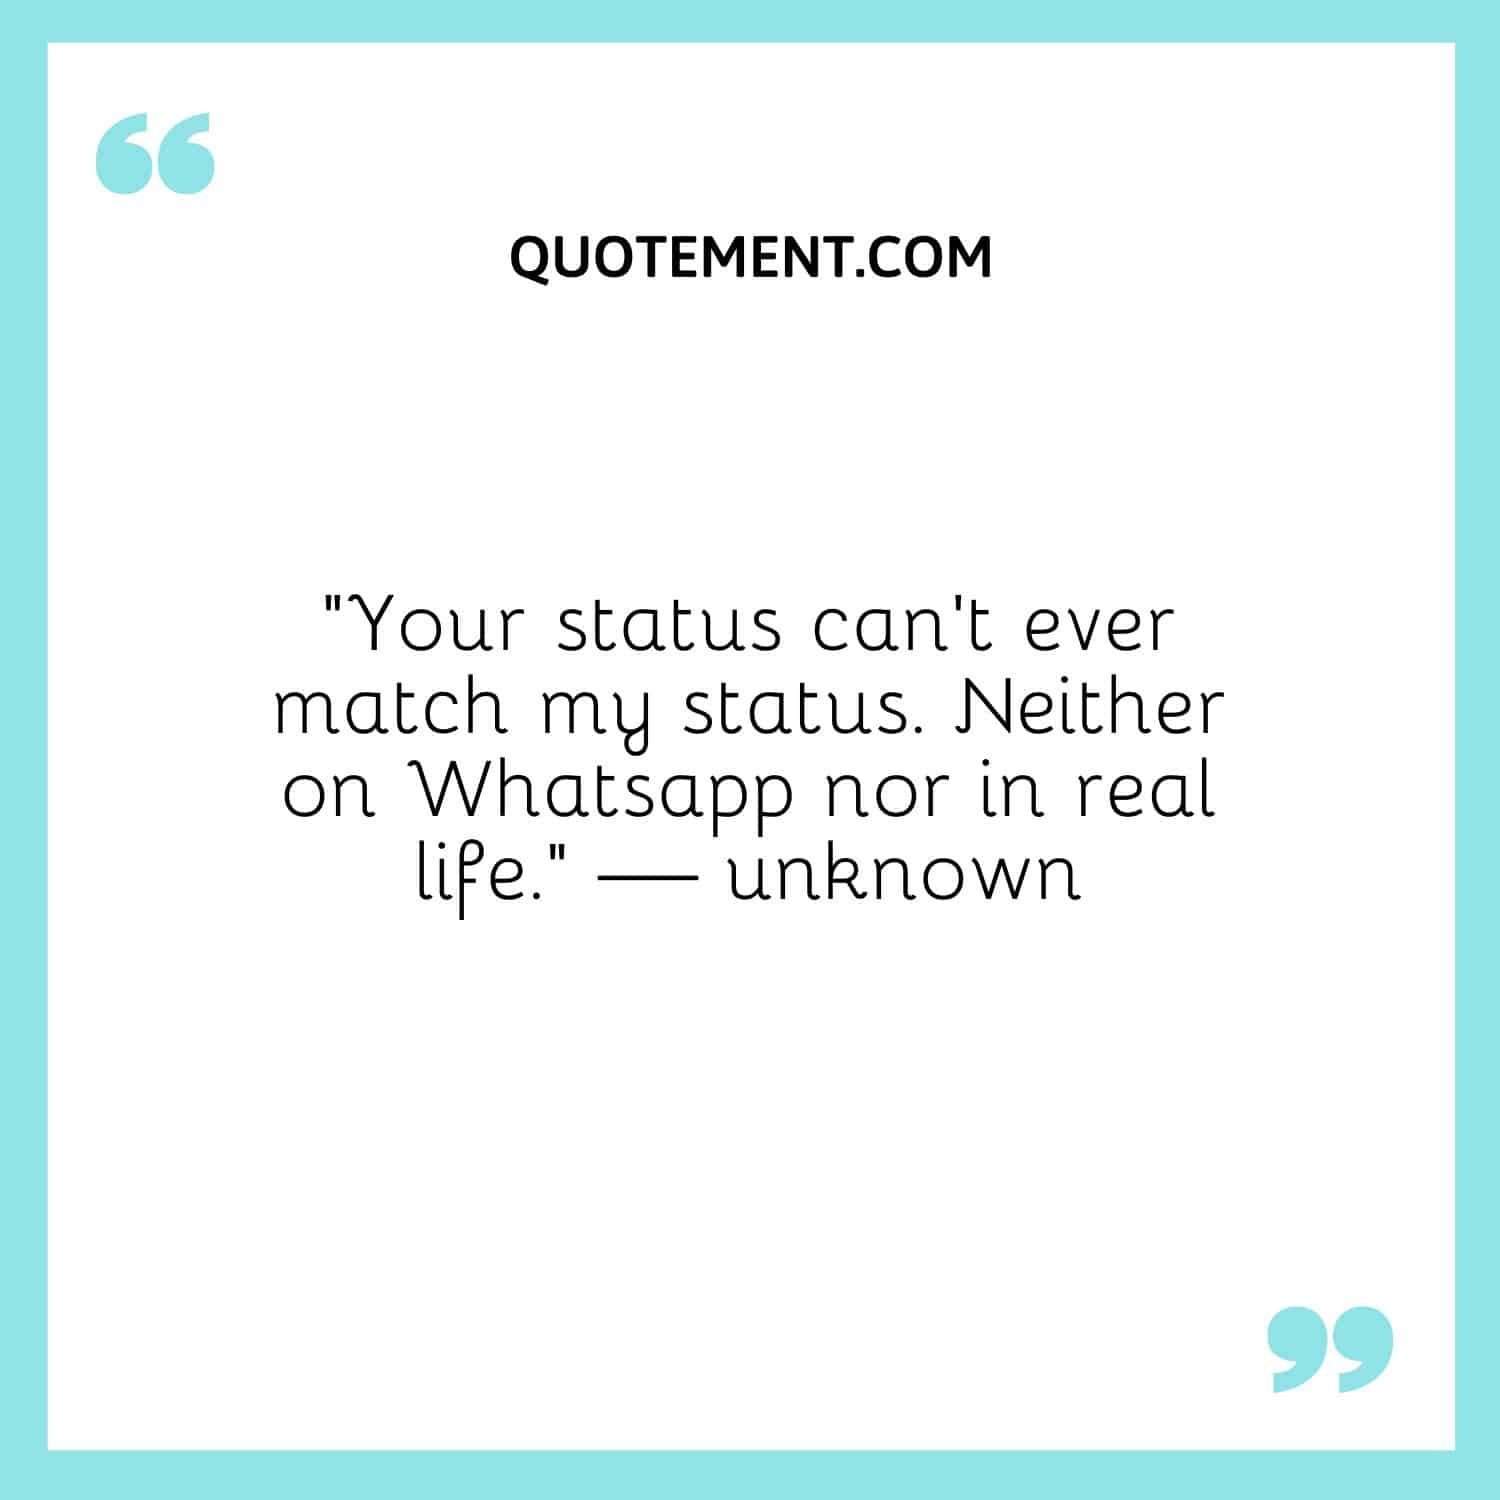 Your status can’t ever match my status